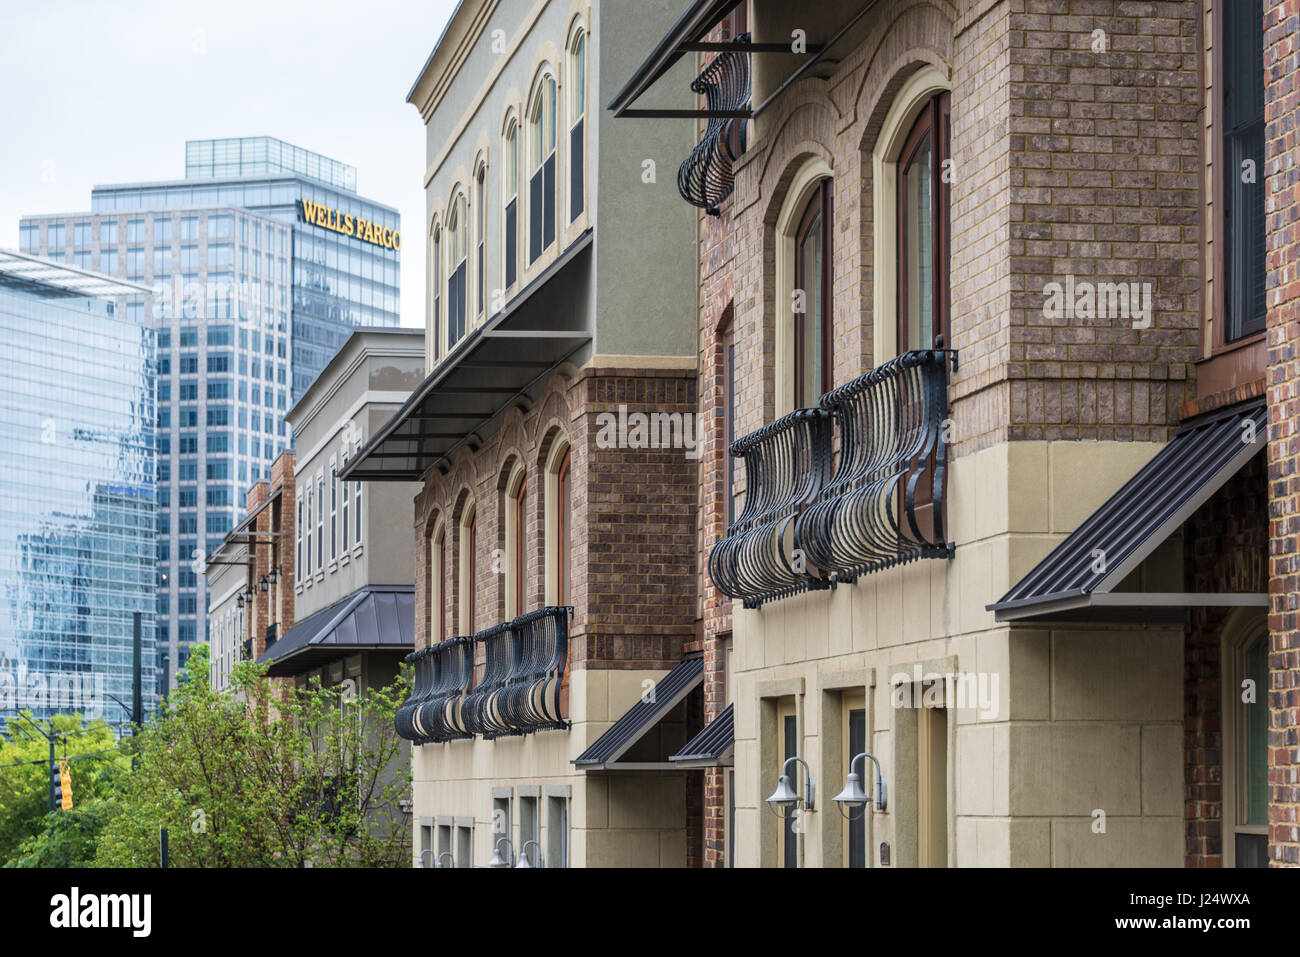 Residential and commercial buildings in the urban live/work/play community of Atlantic Station in Midtown Atlanta, Georgia, USA. Stock Photo